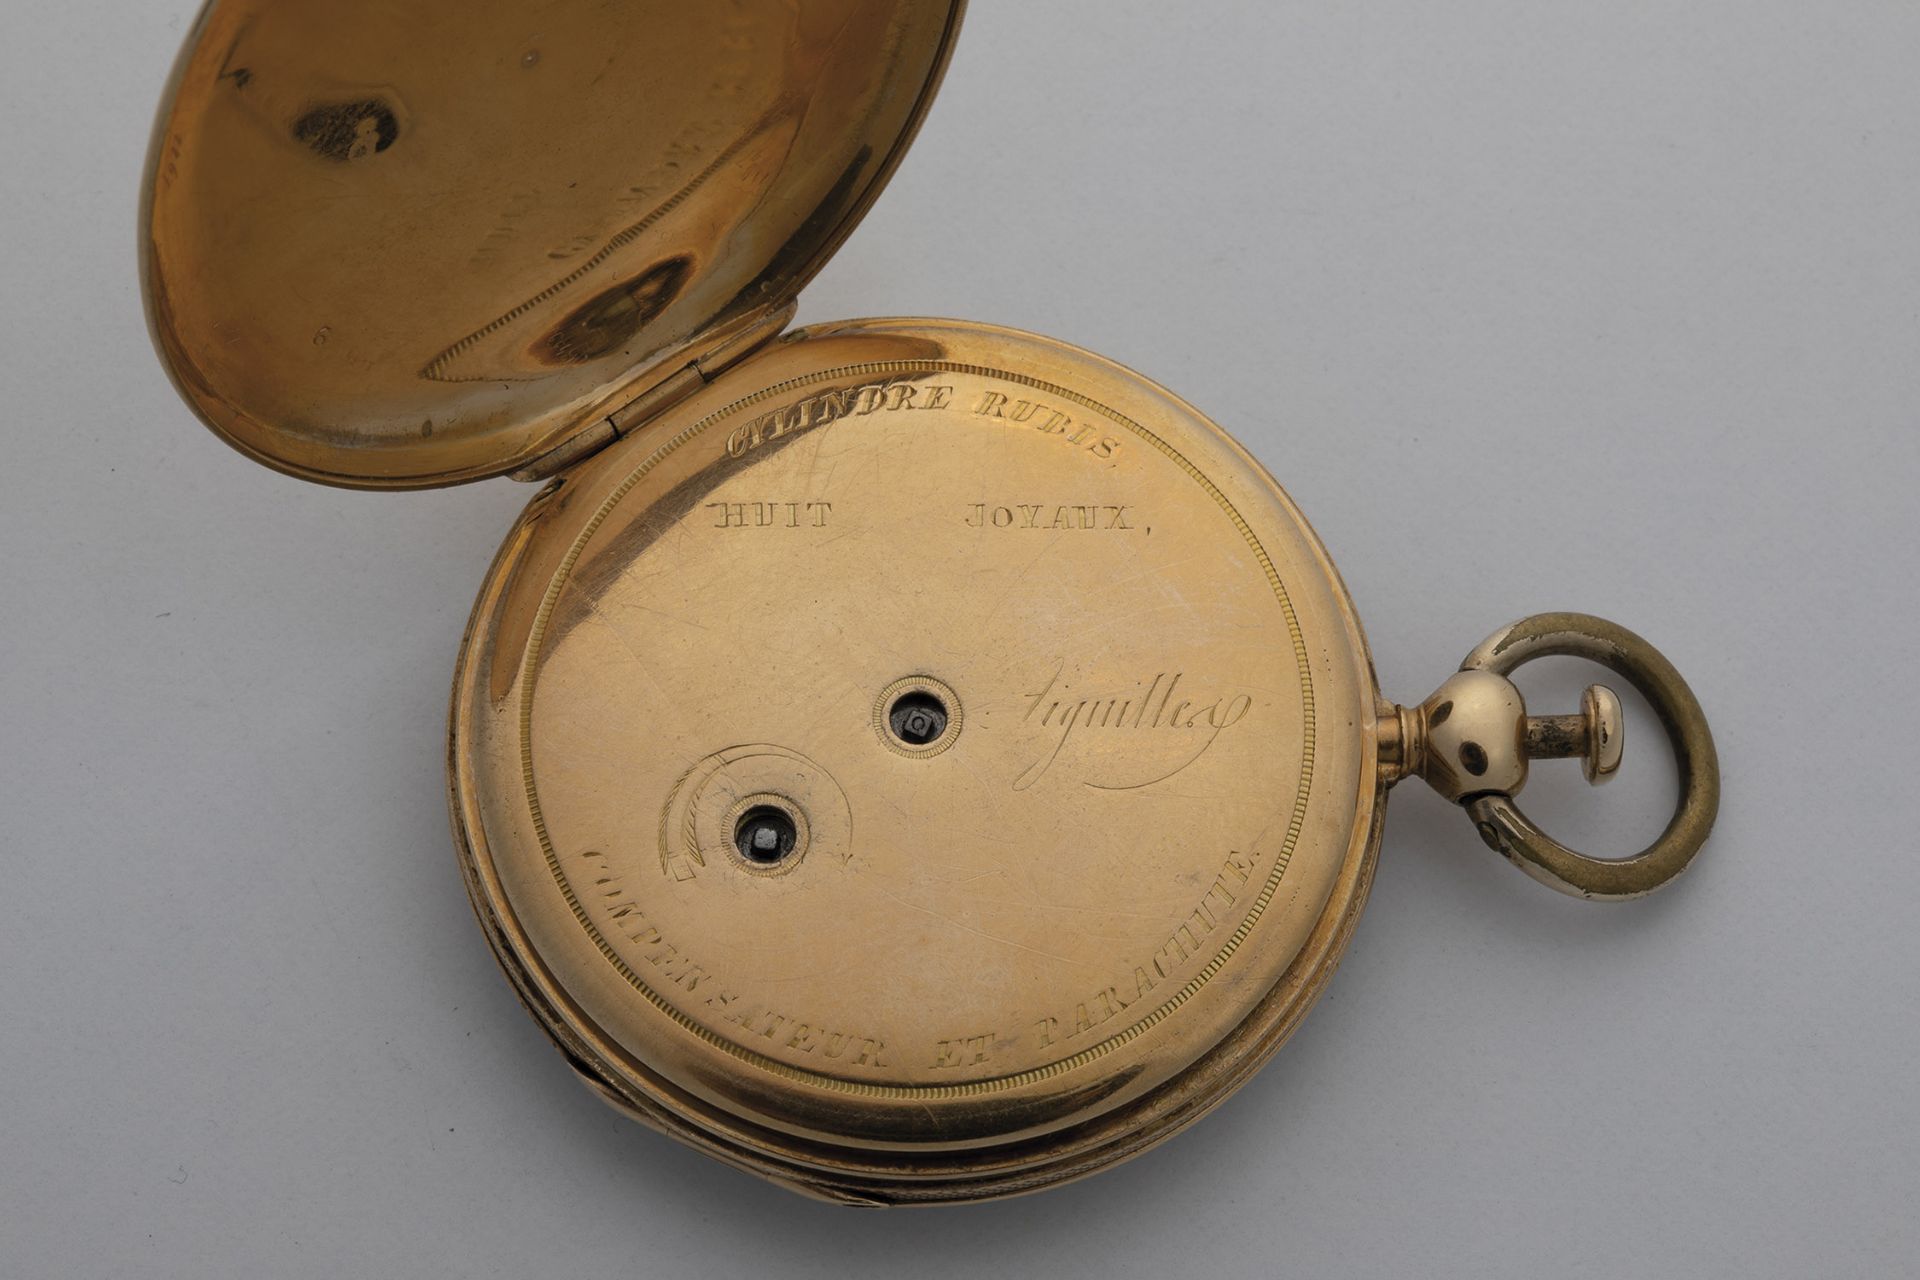 Pocket watch with 1/4 hour repeater - Image 2 of 3